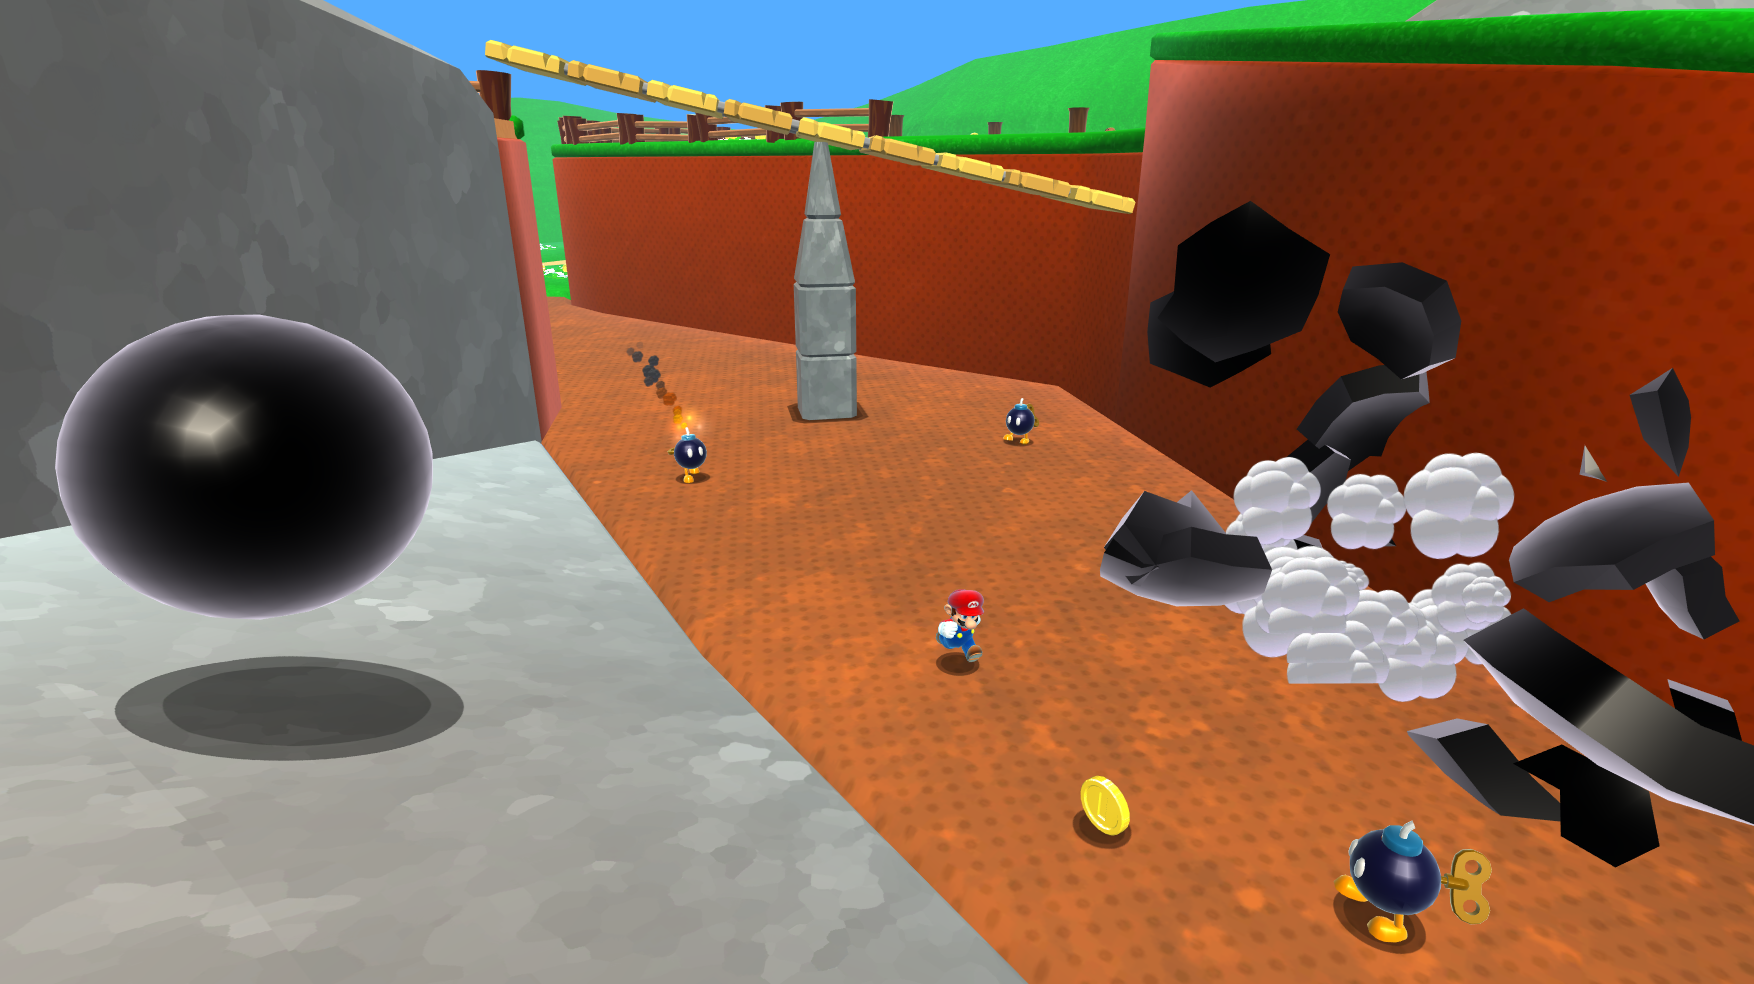 Play Super Mario 64 in beautiful HD for free in your browser.